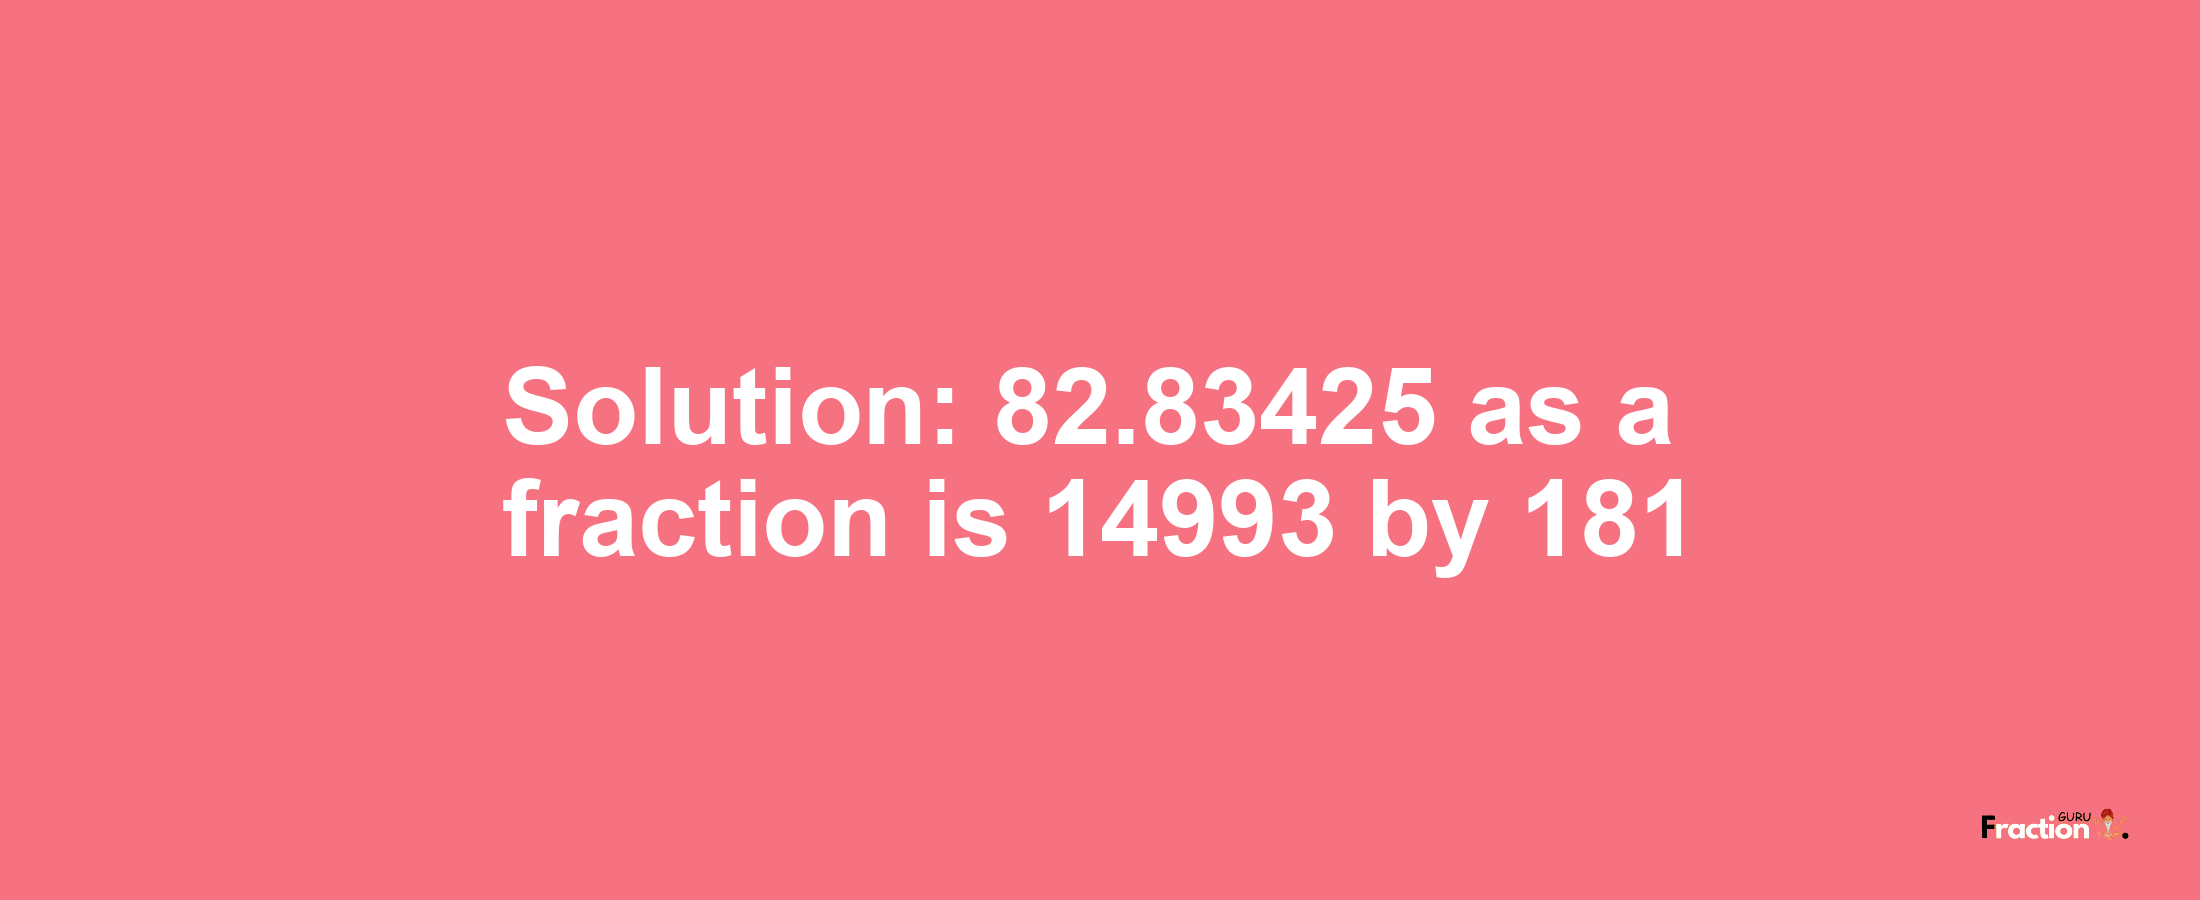 Solution:82.83425 as a fraction is 14993/181